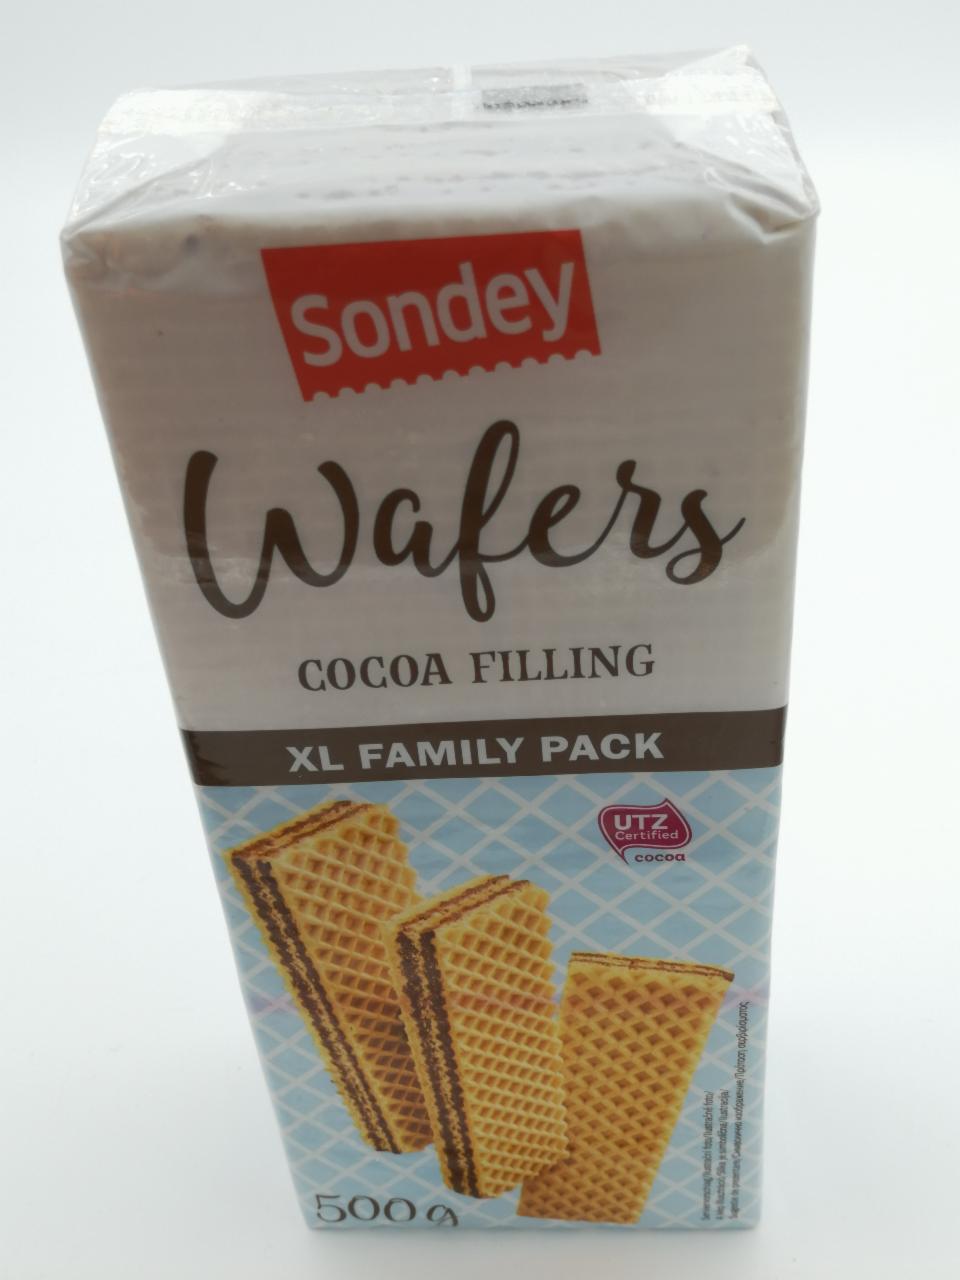 Képek - Sondey wafers cocoa filling xl family pack 